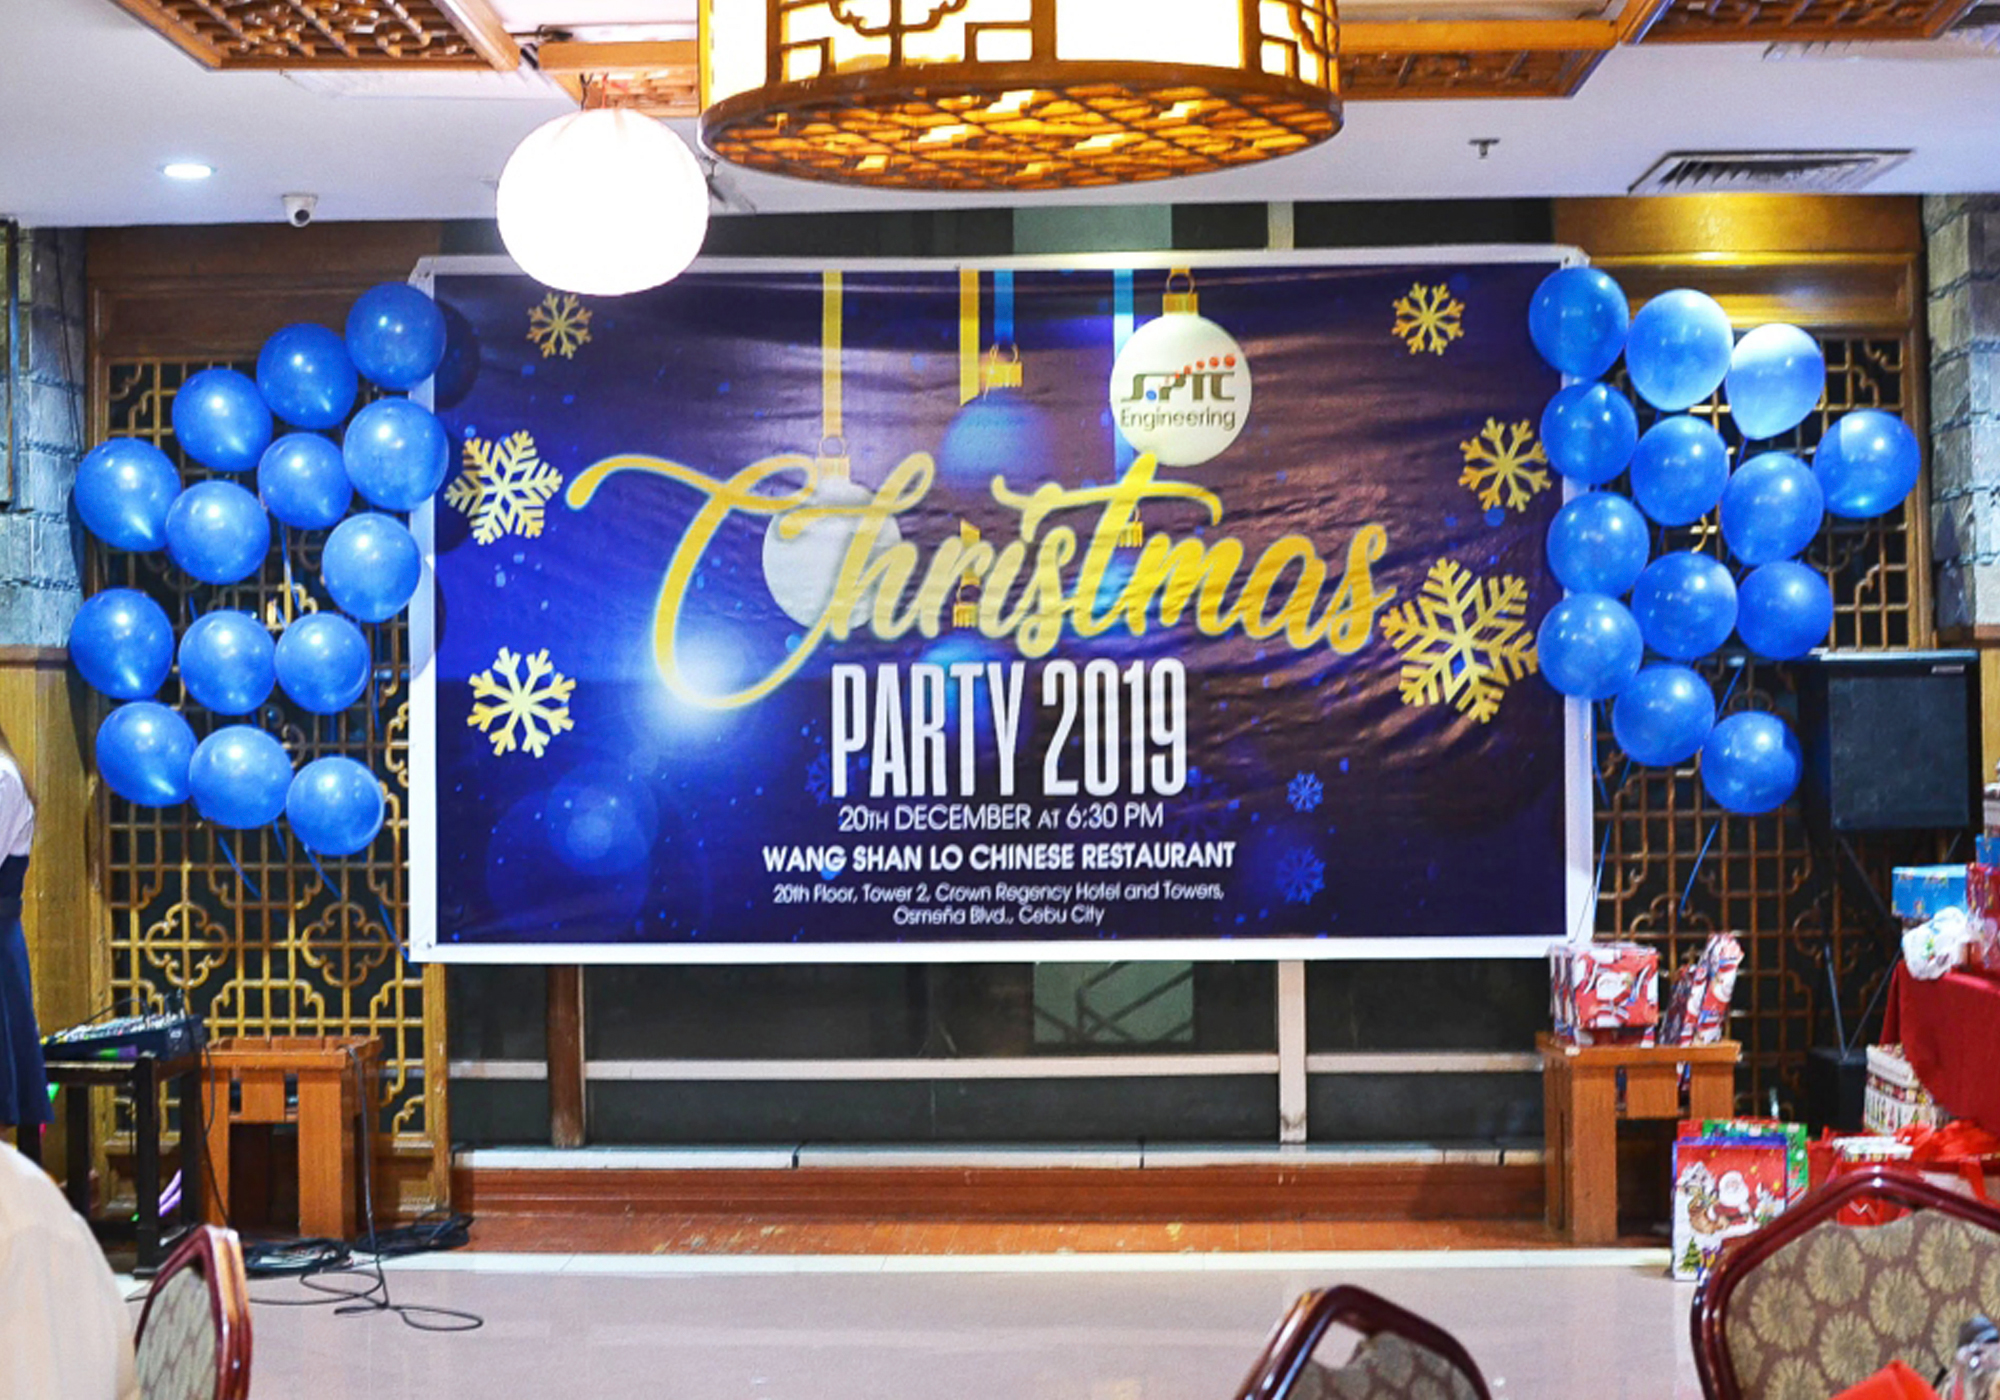 PARTY 2019